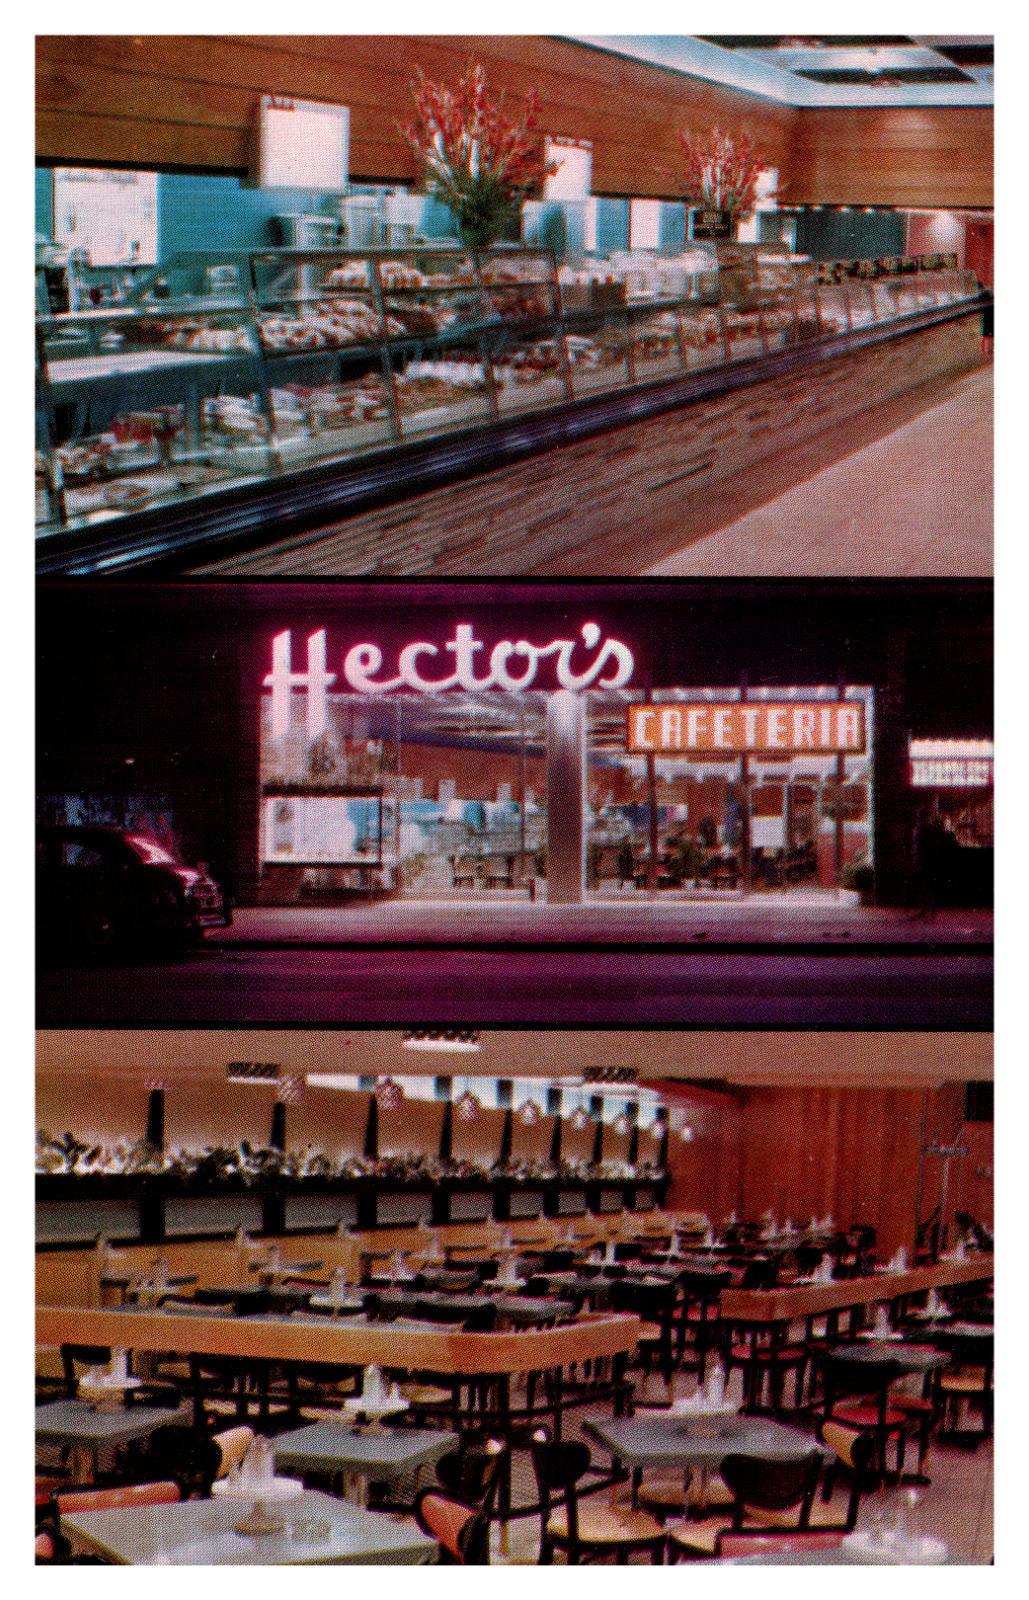 Hectors Self Serve Restaurant New York NY Sign Street View Postcard Unposted